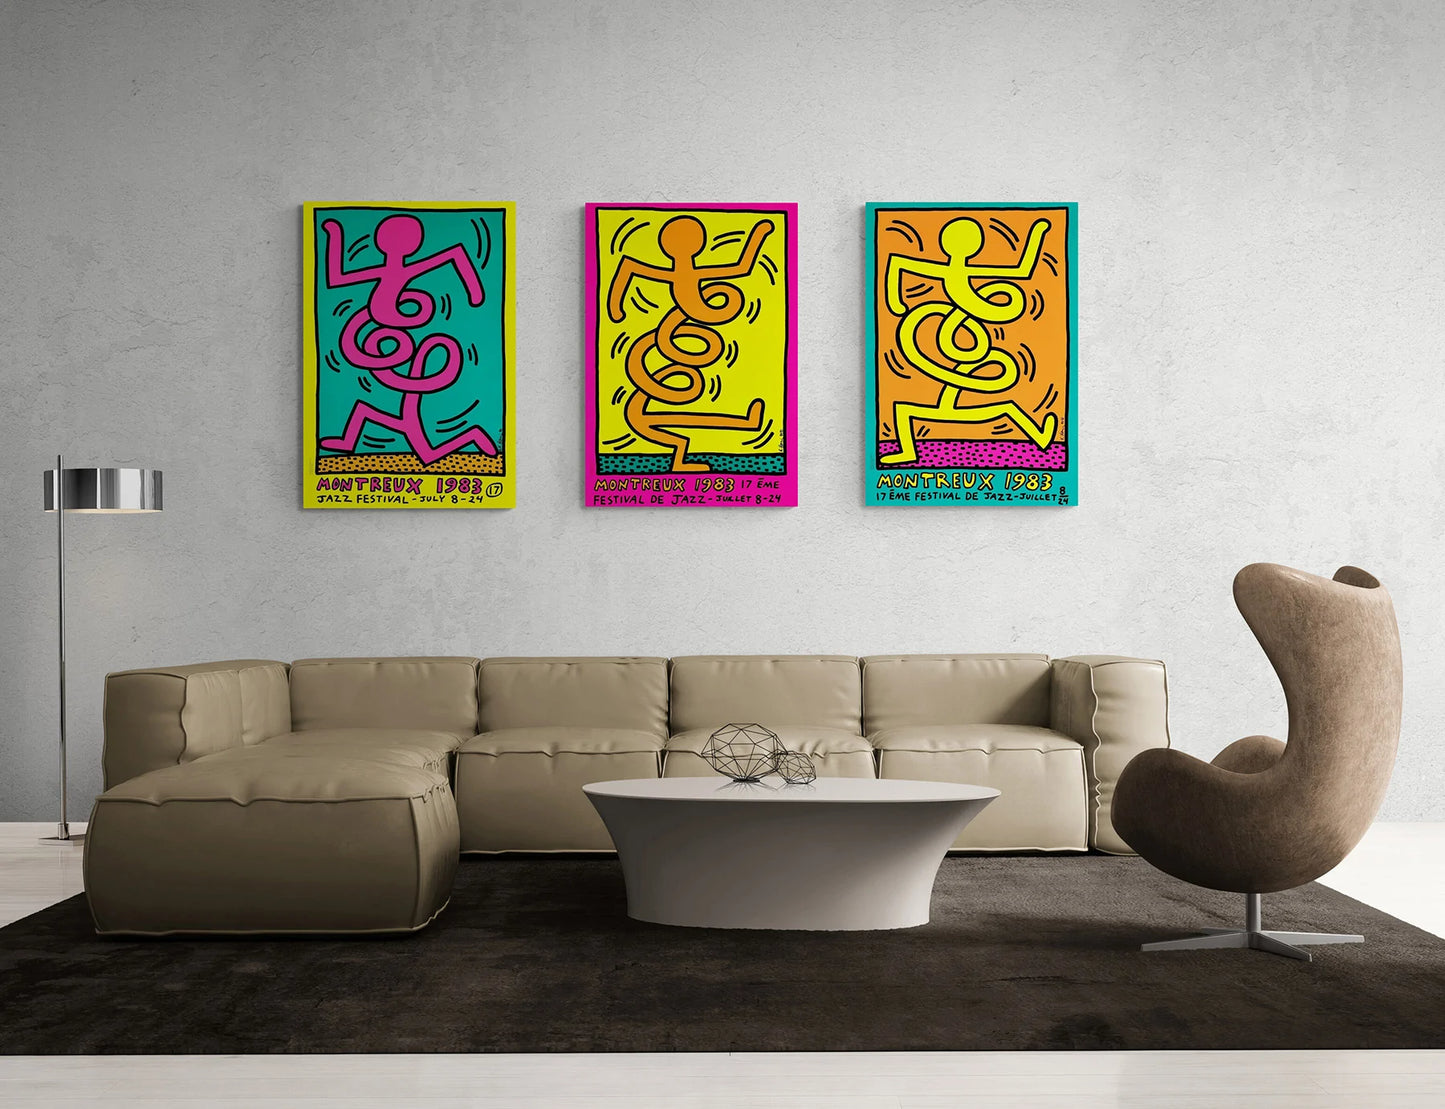 Keith Haring, Montreux Jazz Festival 1983 (Pink) - Smolensky Gallery